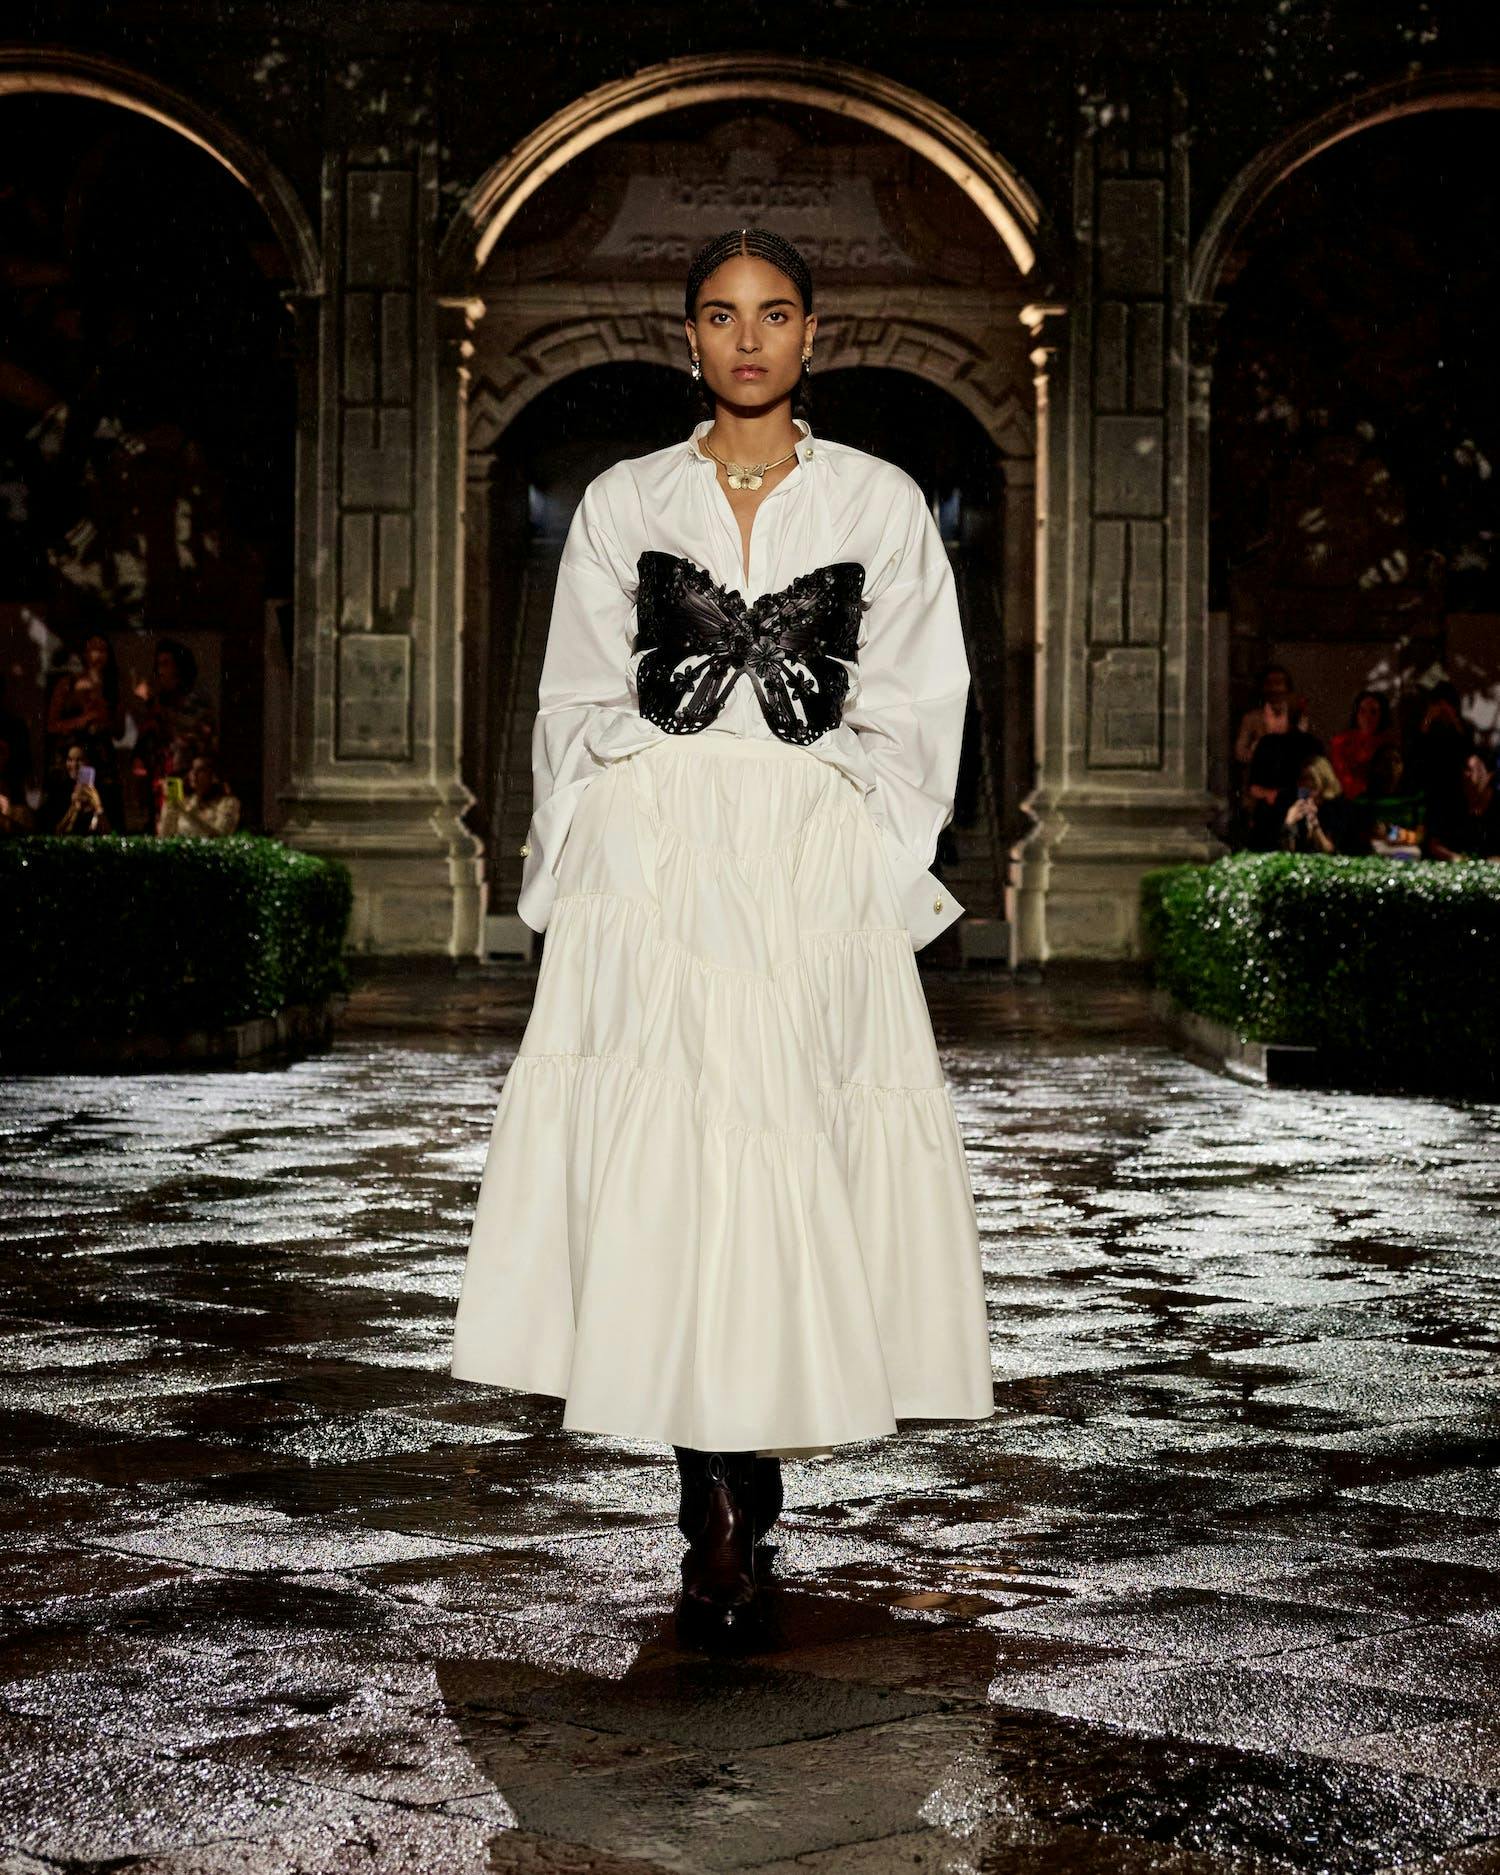 A model walking in a white dress and black butterfly-shaped corset.